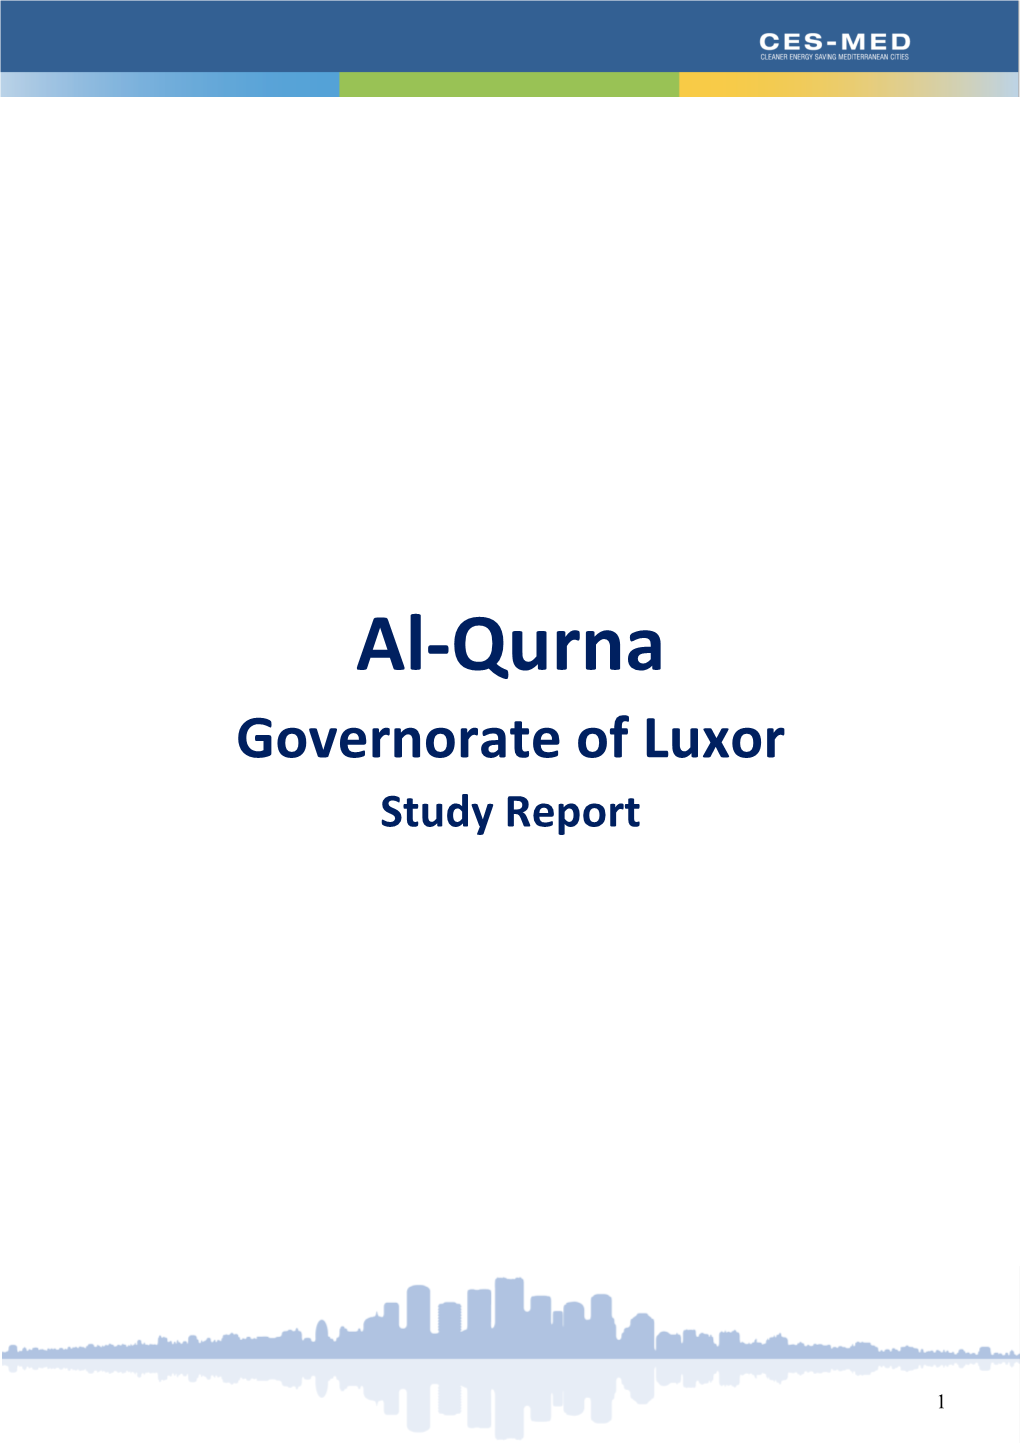 Al-Qurna Governorate of Luxor Study Report